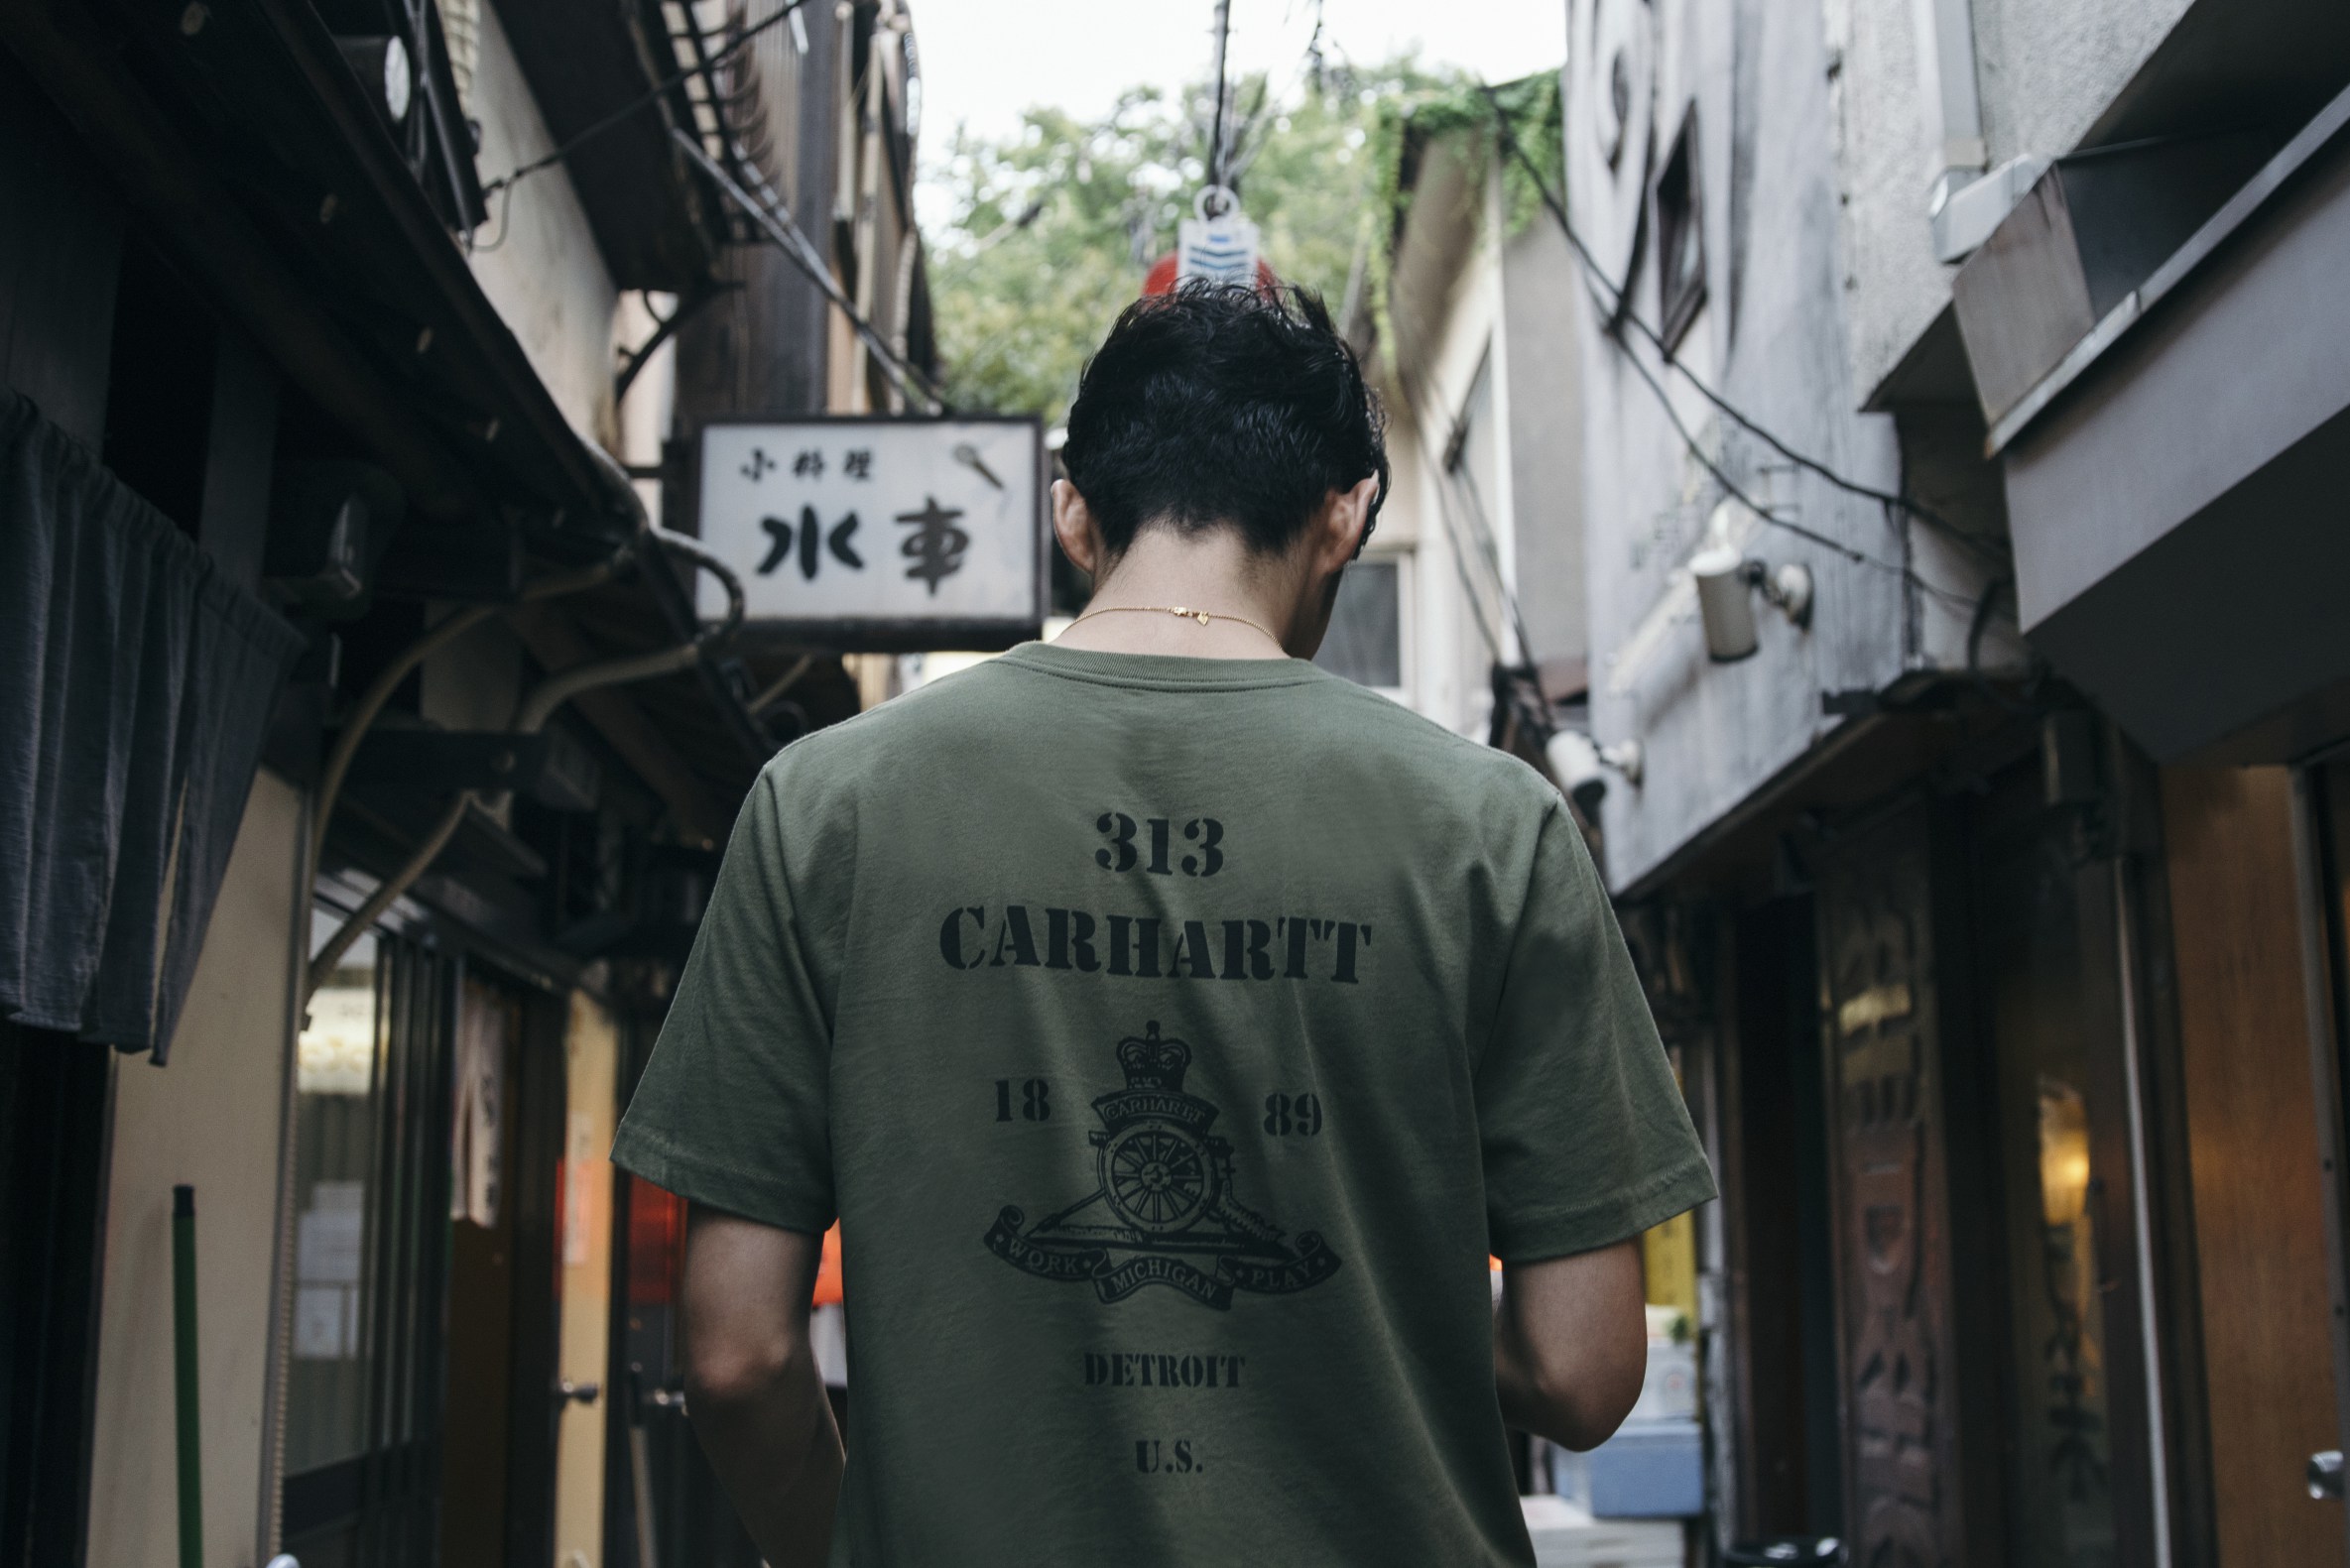 carhartt-wip-2016-fall-capsule-collection-01